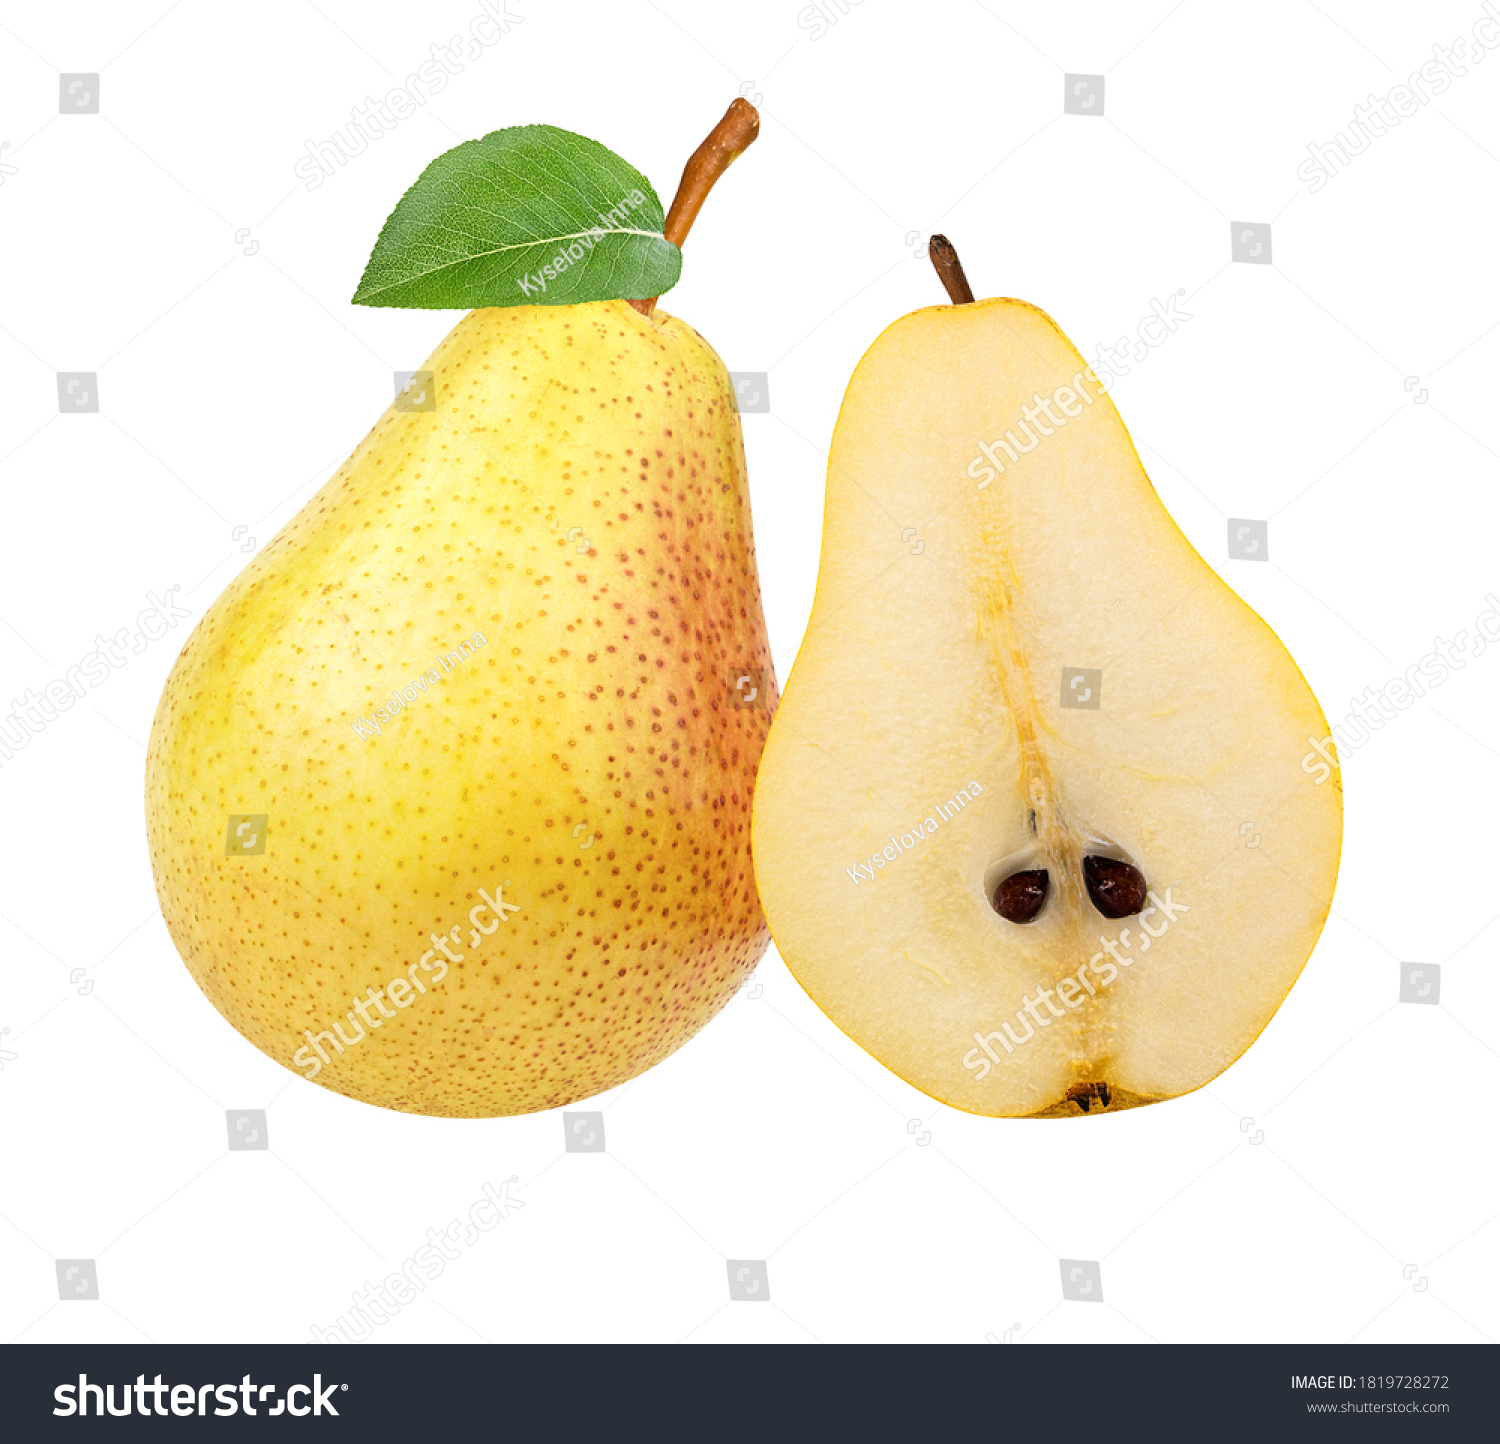 Pear isolated on white background #1819728272